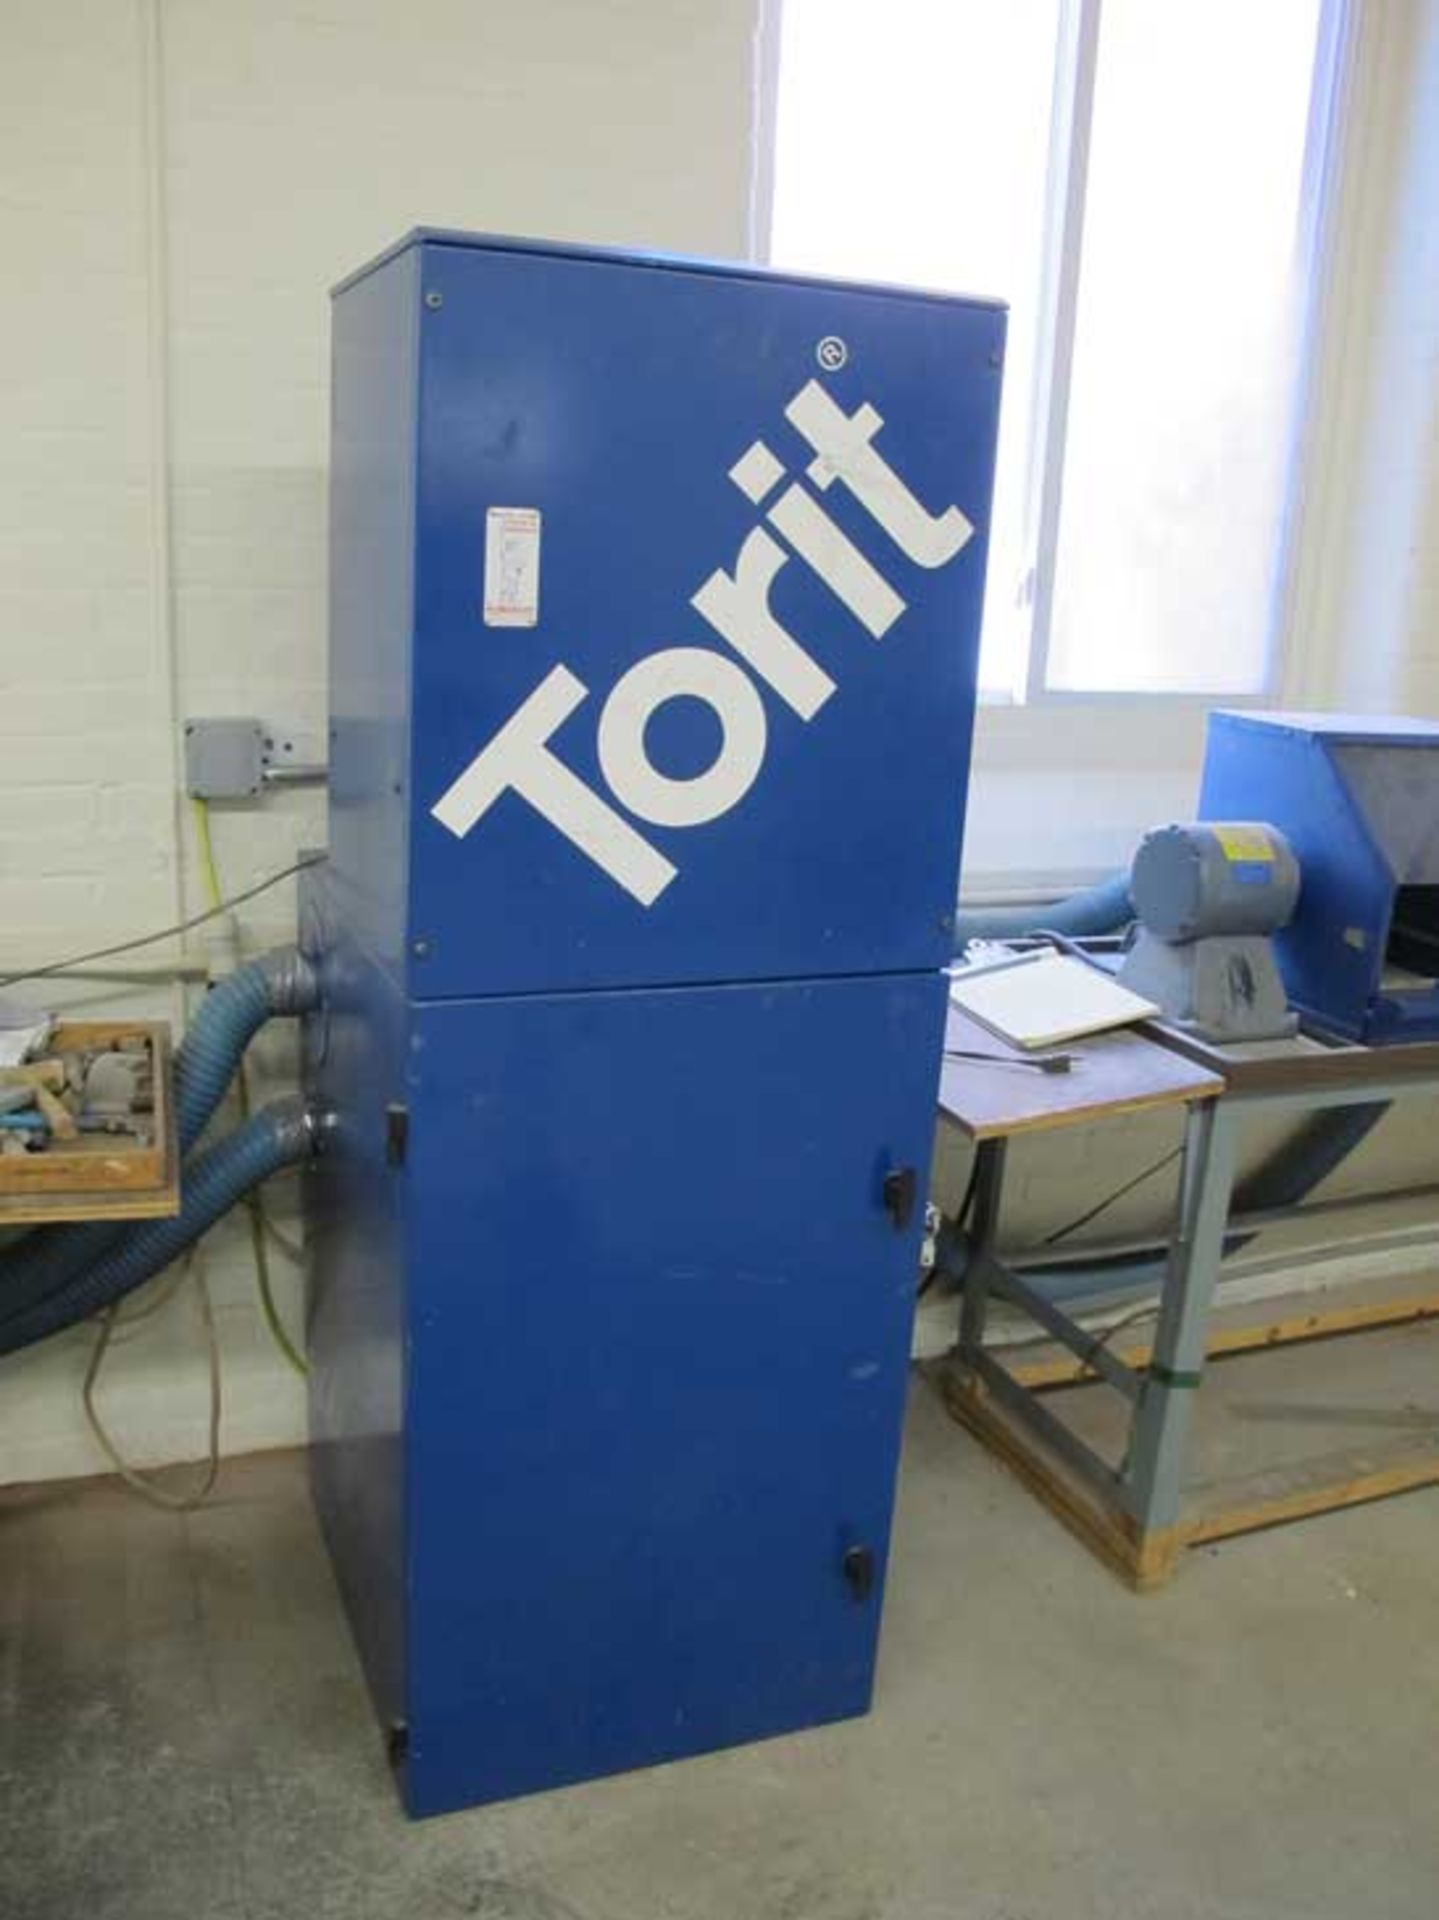 Donaldson 5 HP Dust Collector Model VS1500  S/N 1G493919, 3600 RPM; $25 Charge to bring to